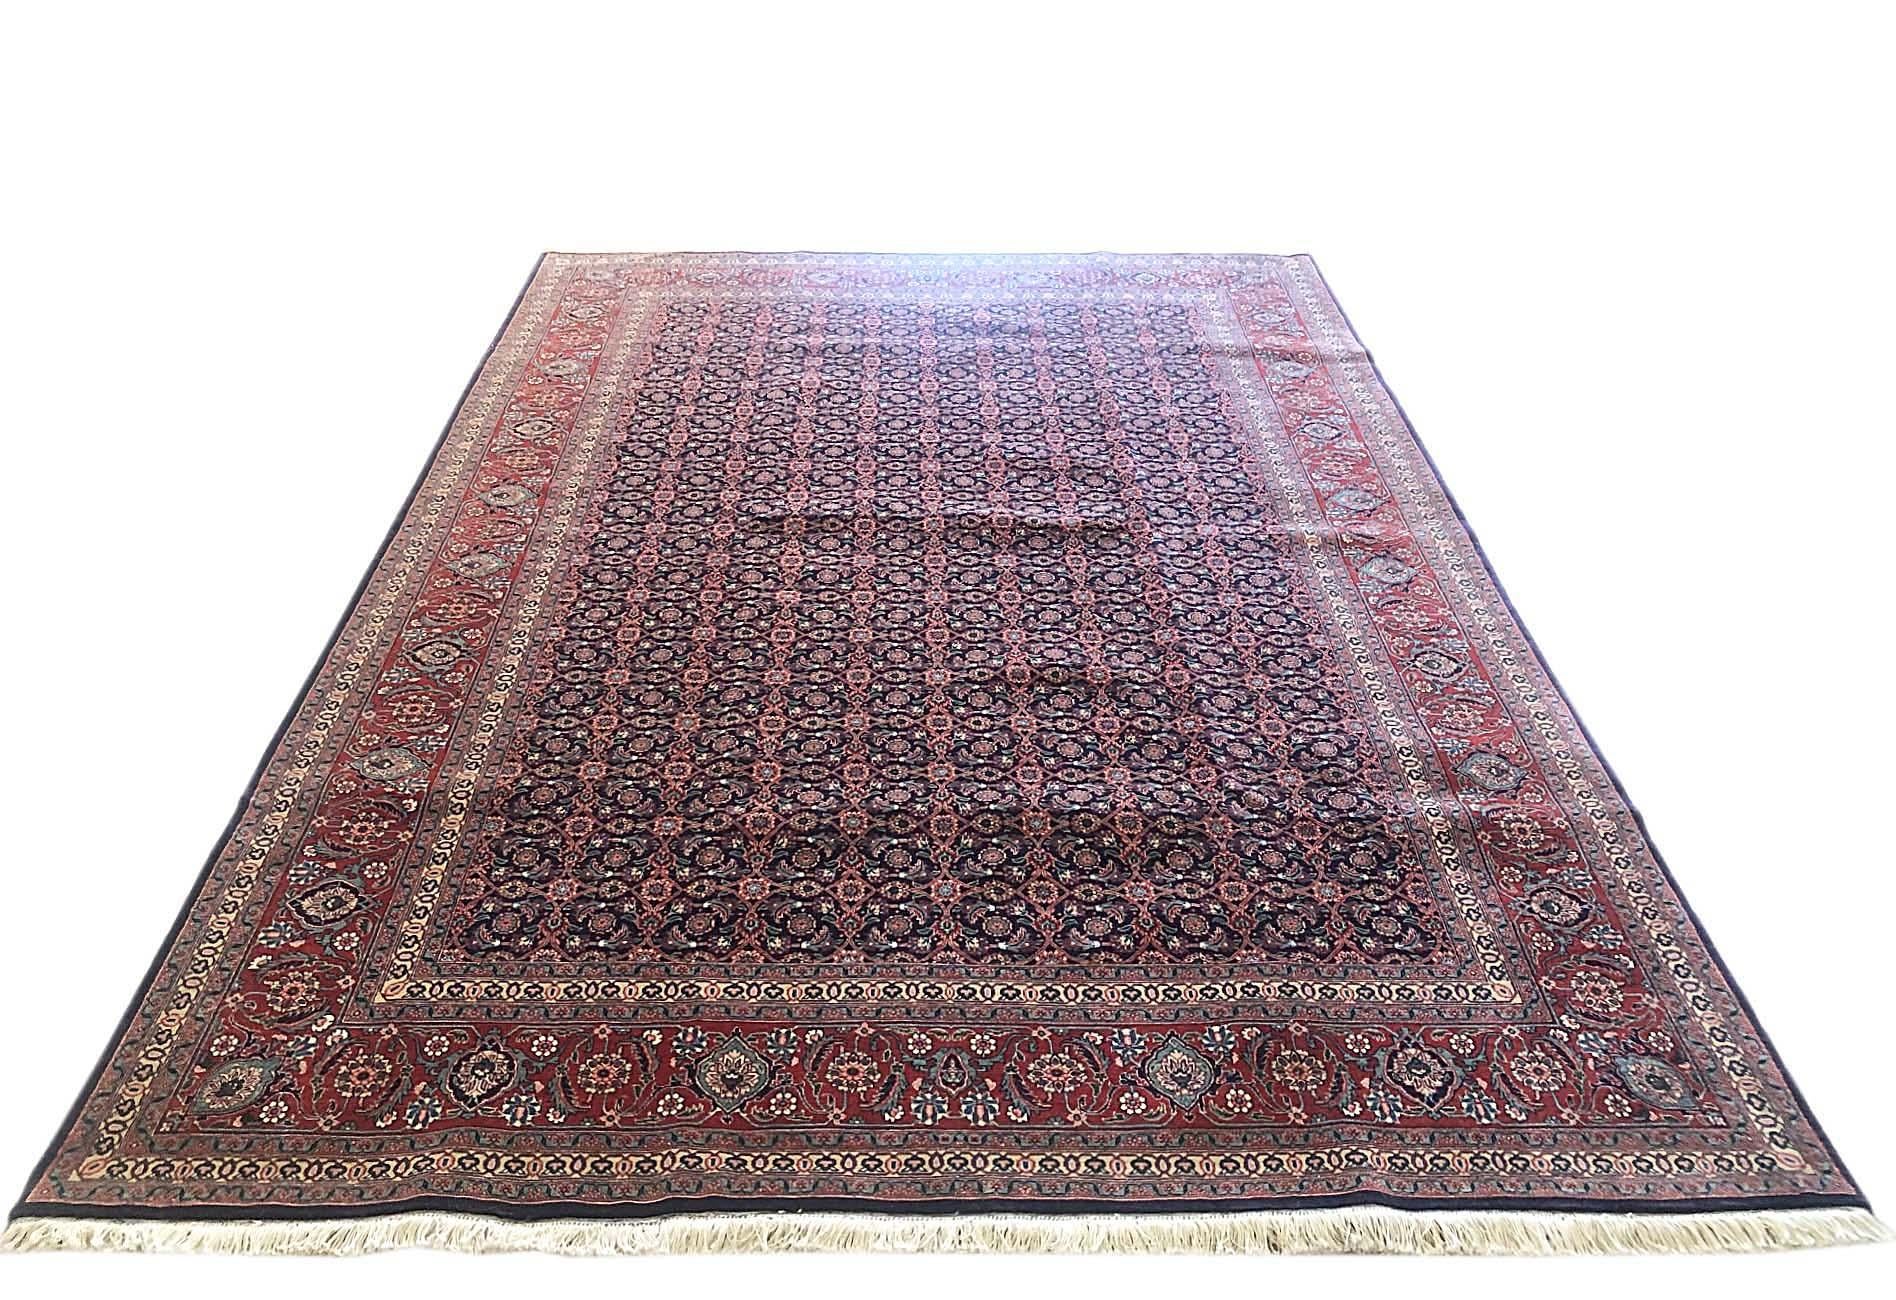 This Persian Tabriz rug has wool and silk pile and cotton foundation. The design is called Herati, this design is quite well known among the different styles of Persian rugs which features an intricate all-over pattern with elegant floral design.